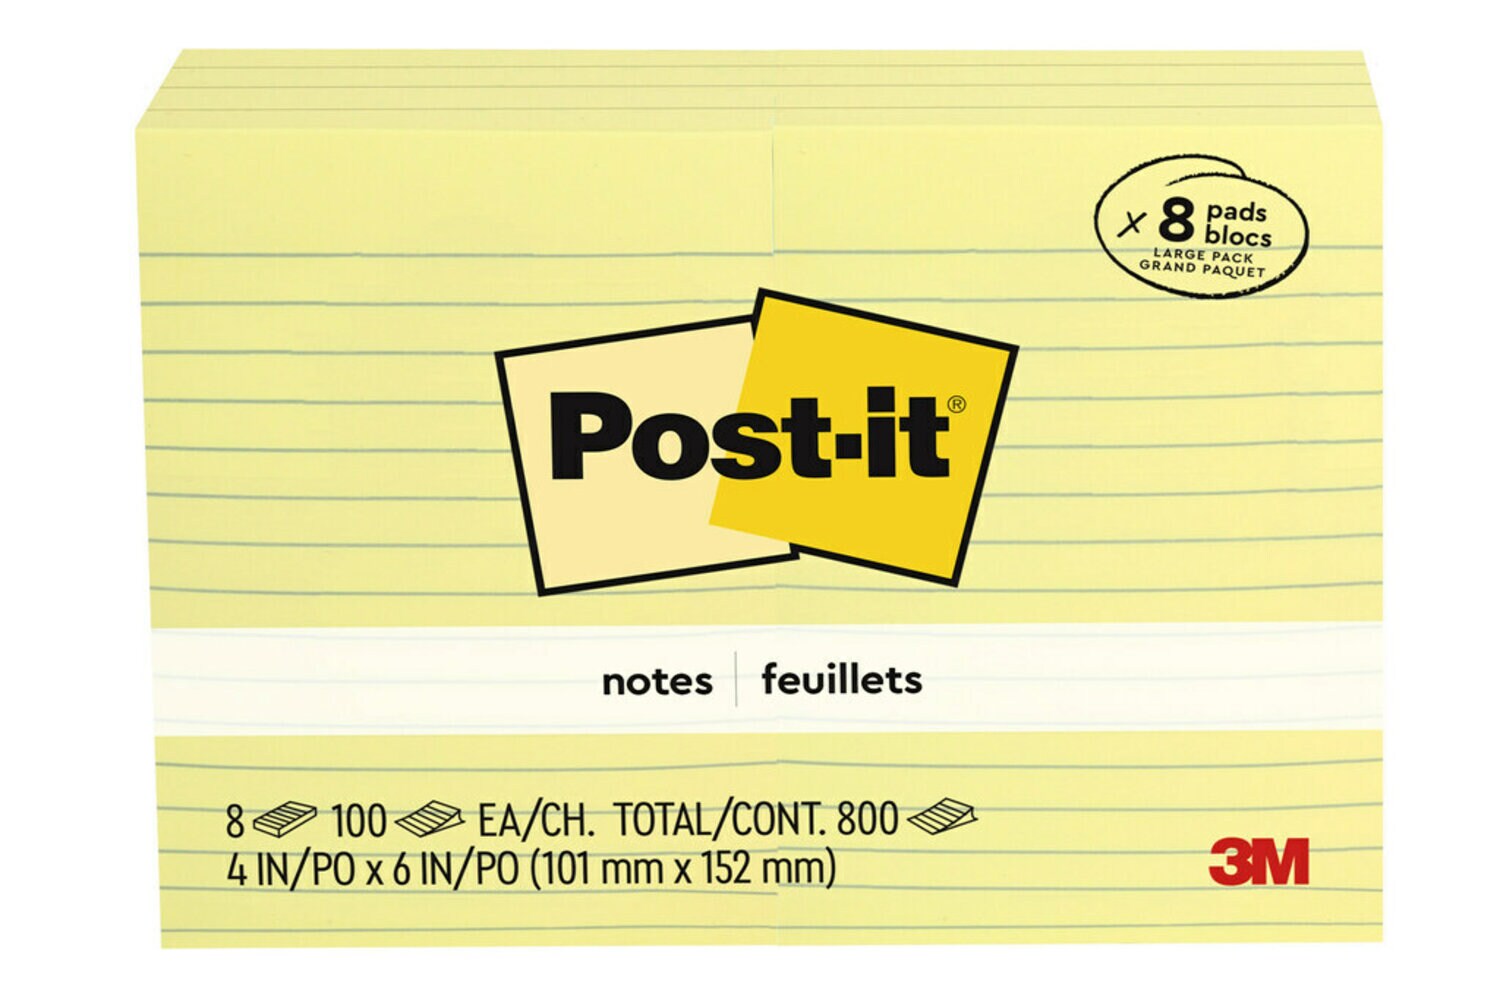 7100075820 - Post-it Notes 660-8PK, 4 in x 6 in (101 mm x 152 mm), Lined